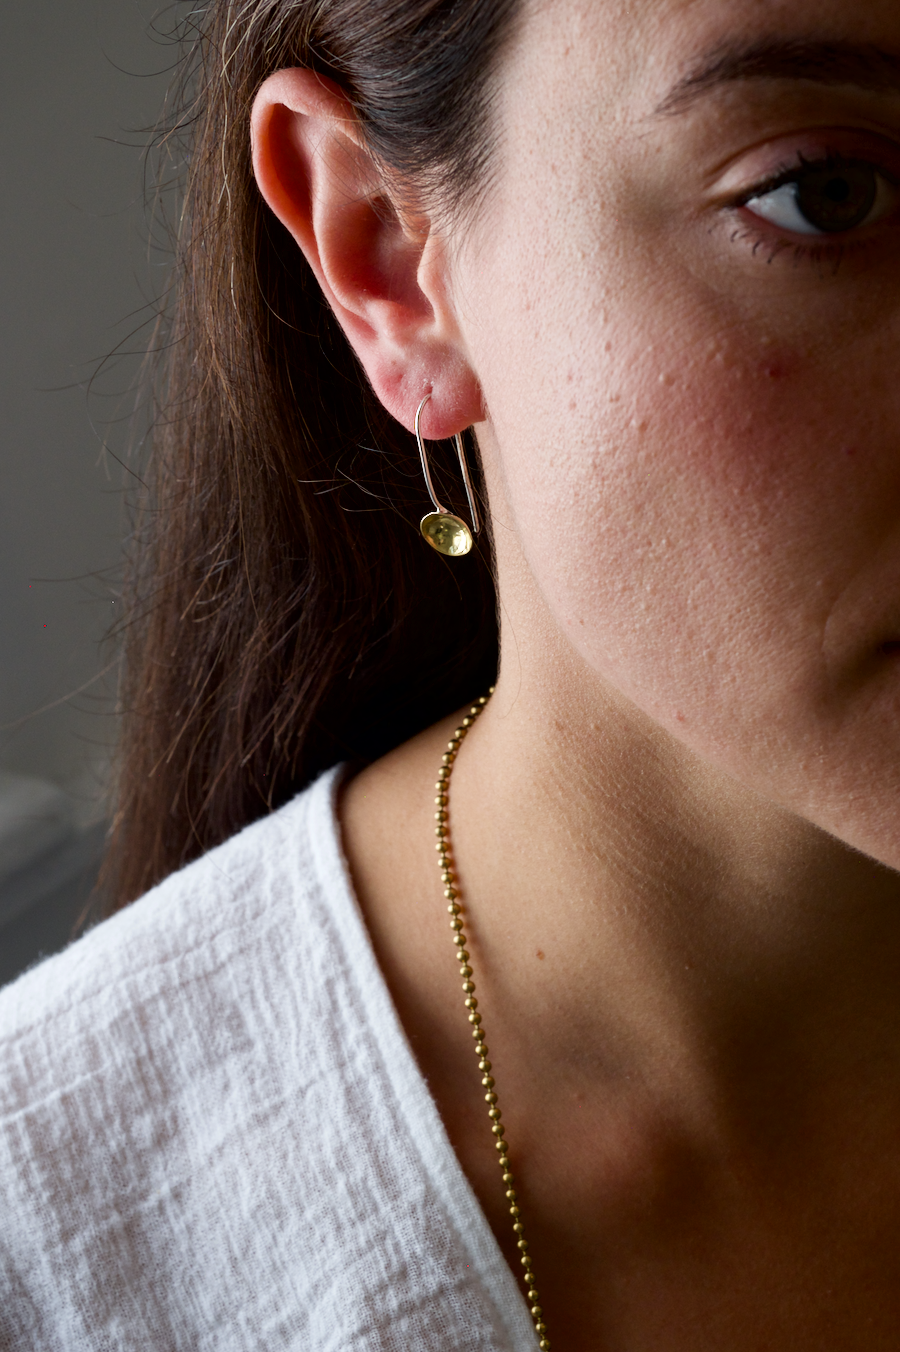 Lara Earrings: Recycled brass earrings consisting of bowl shapes on recycled silver wires. Worn by a model.